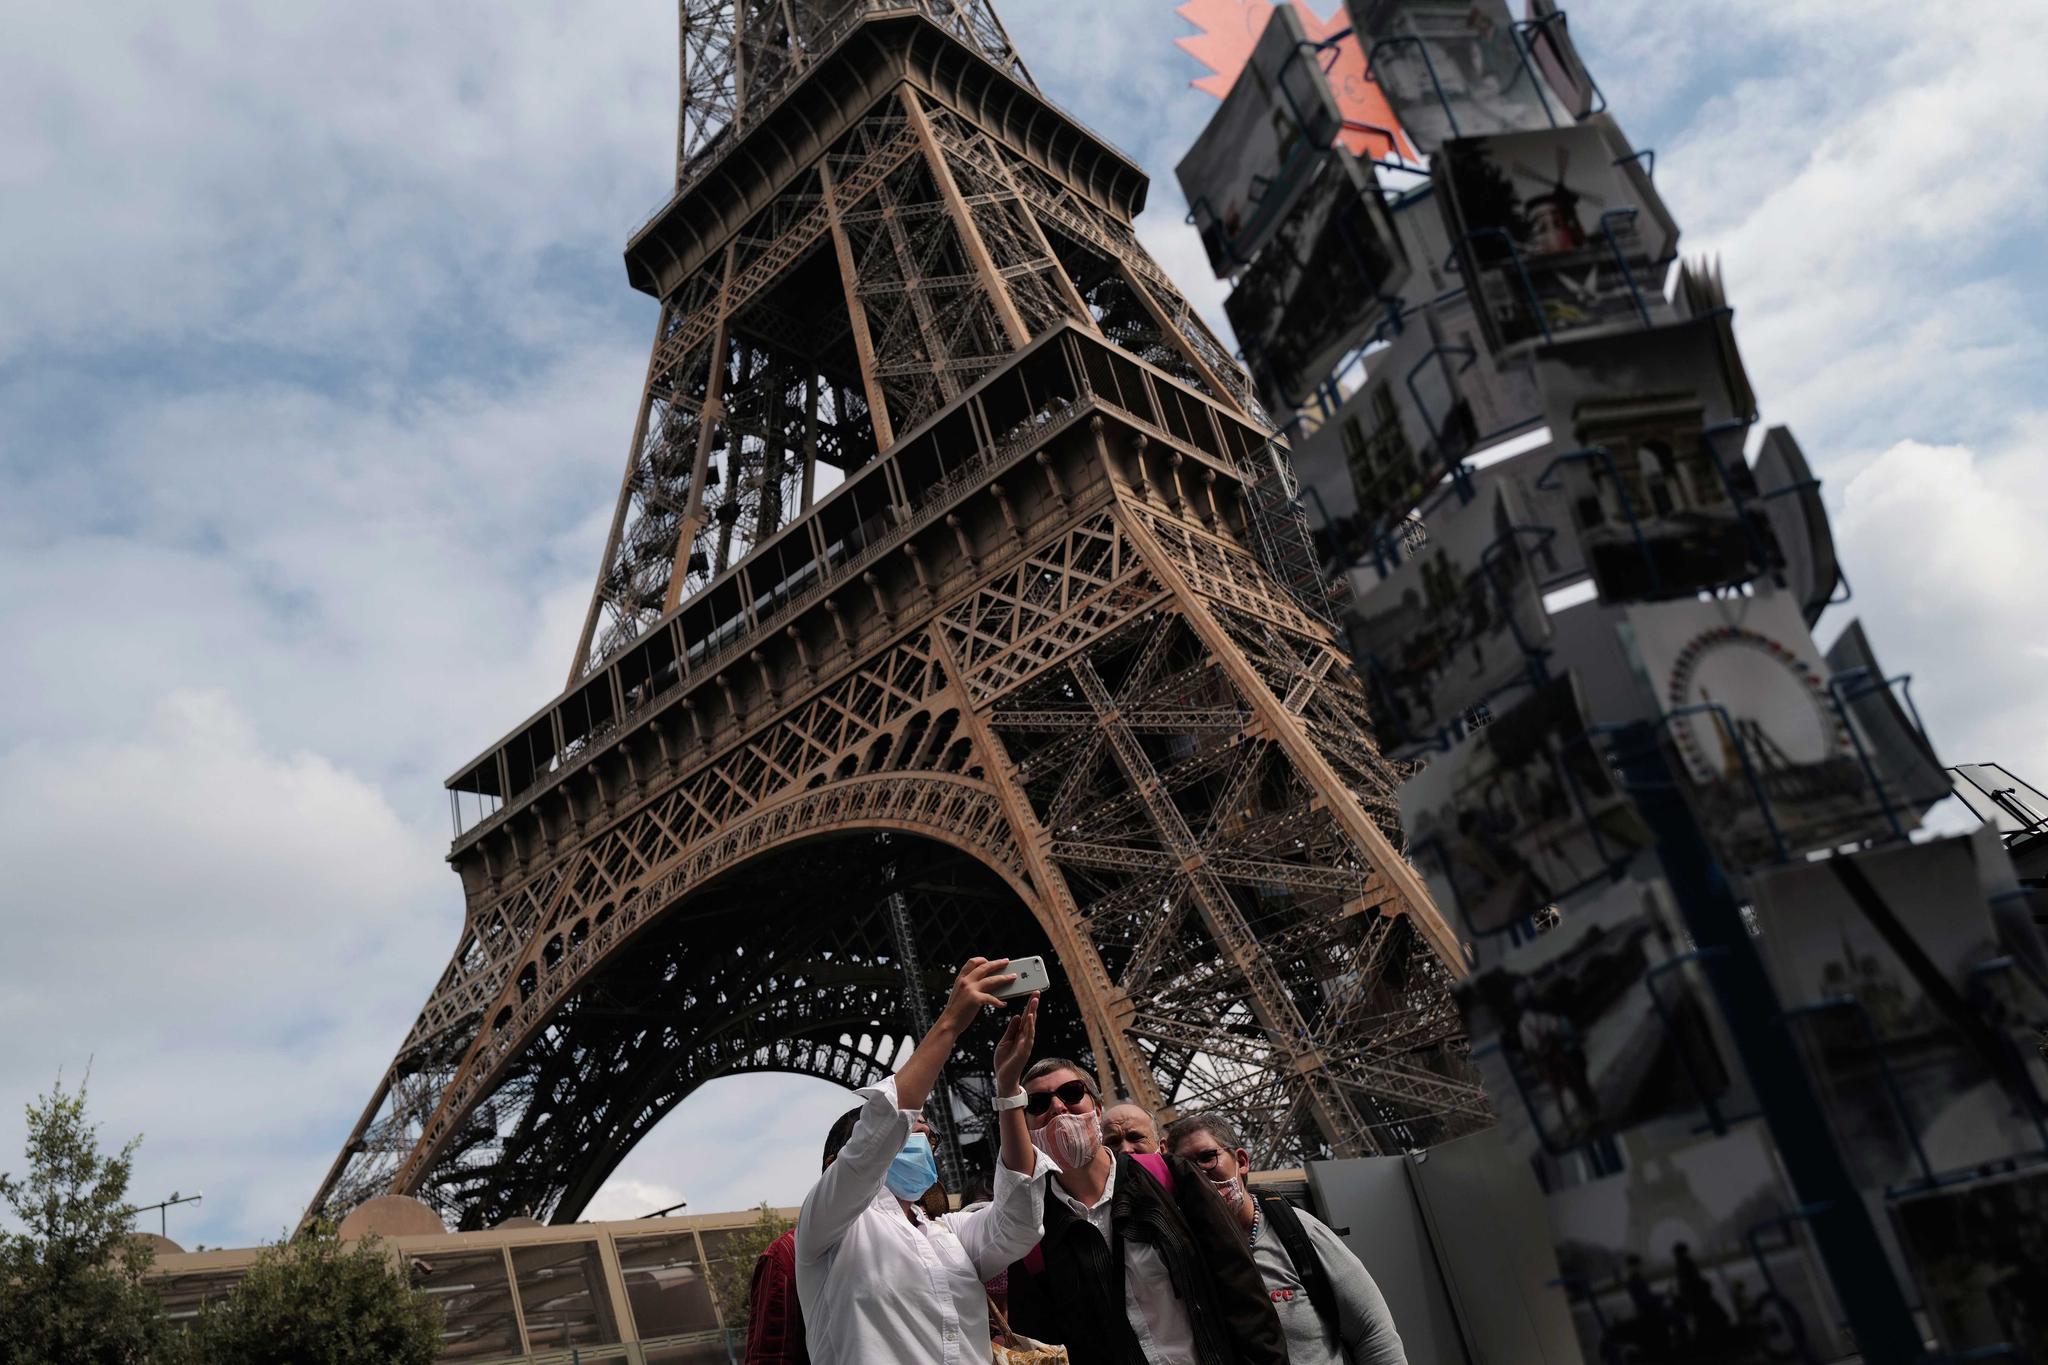 Visitors take a selfie at the main entrance of the Eiffel Tower